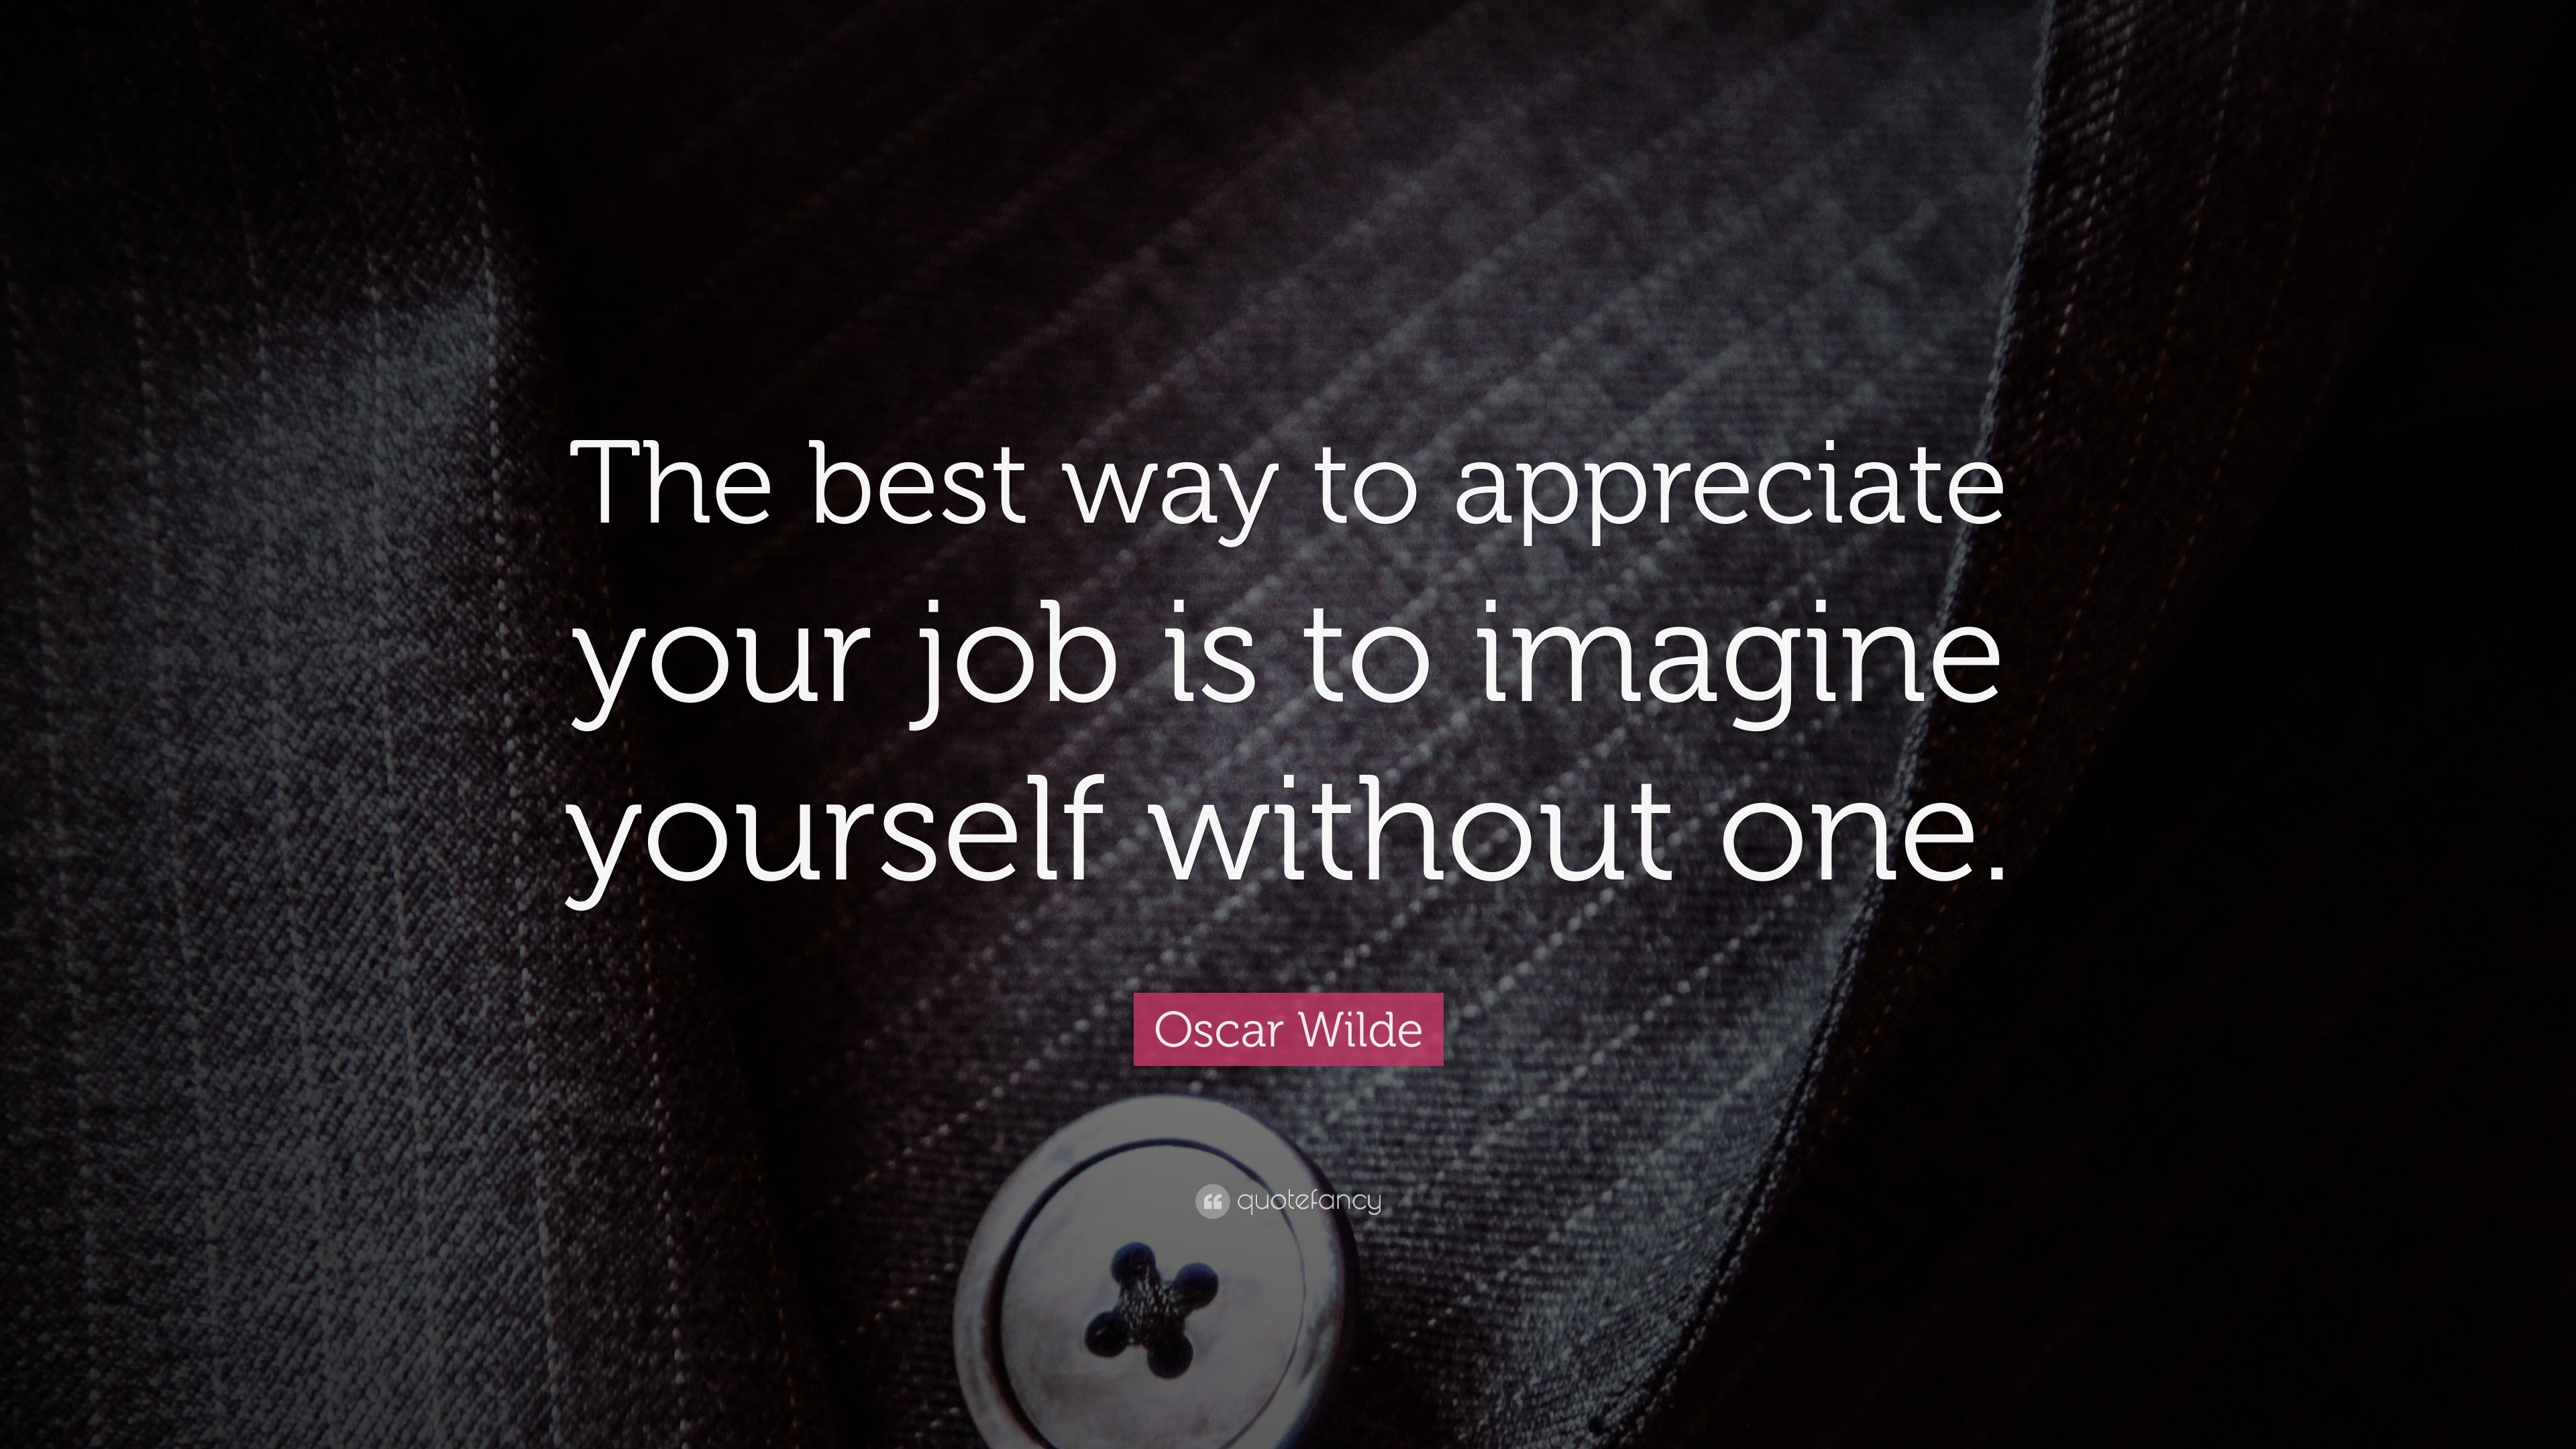 3840x2160 Funny Quotes: “The best way to appreciate your job is to imagine yourself  without